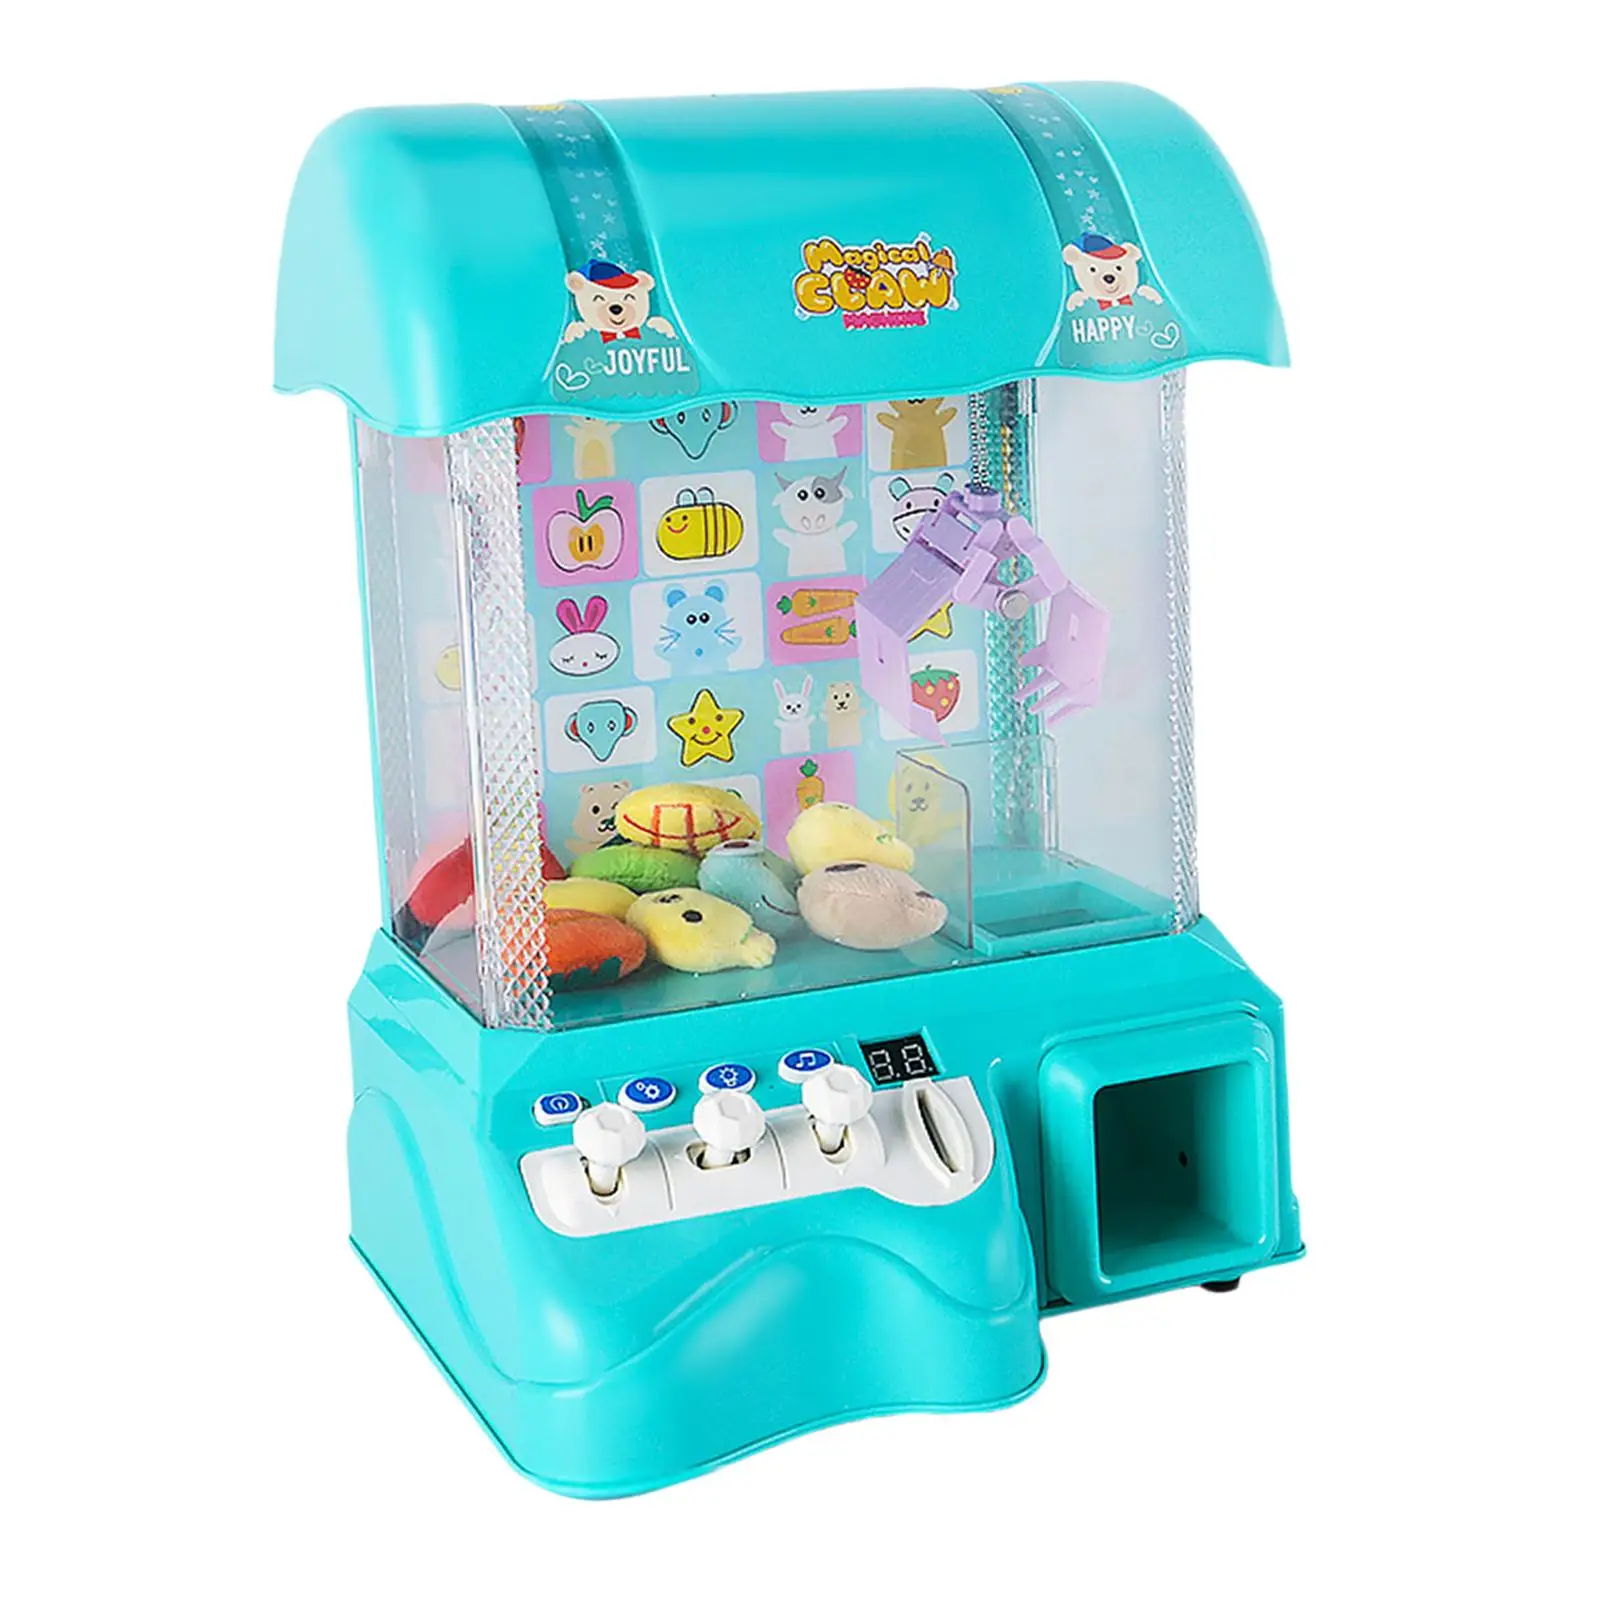 Kids Electronic Claw Toy Grabber Machine Home Arcade w/ Dolls & Coins